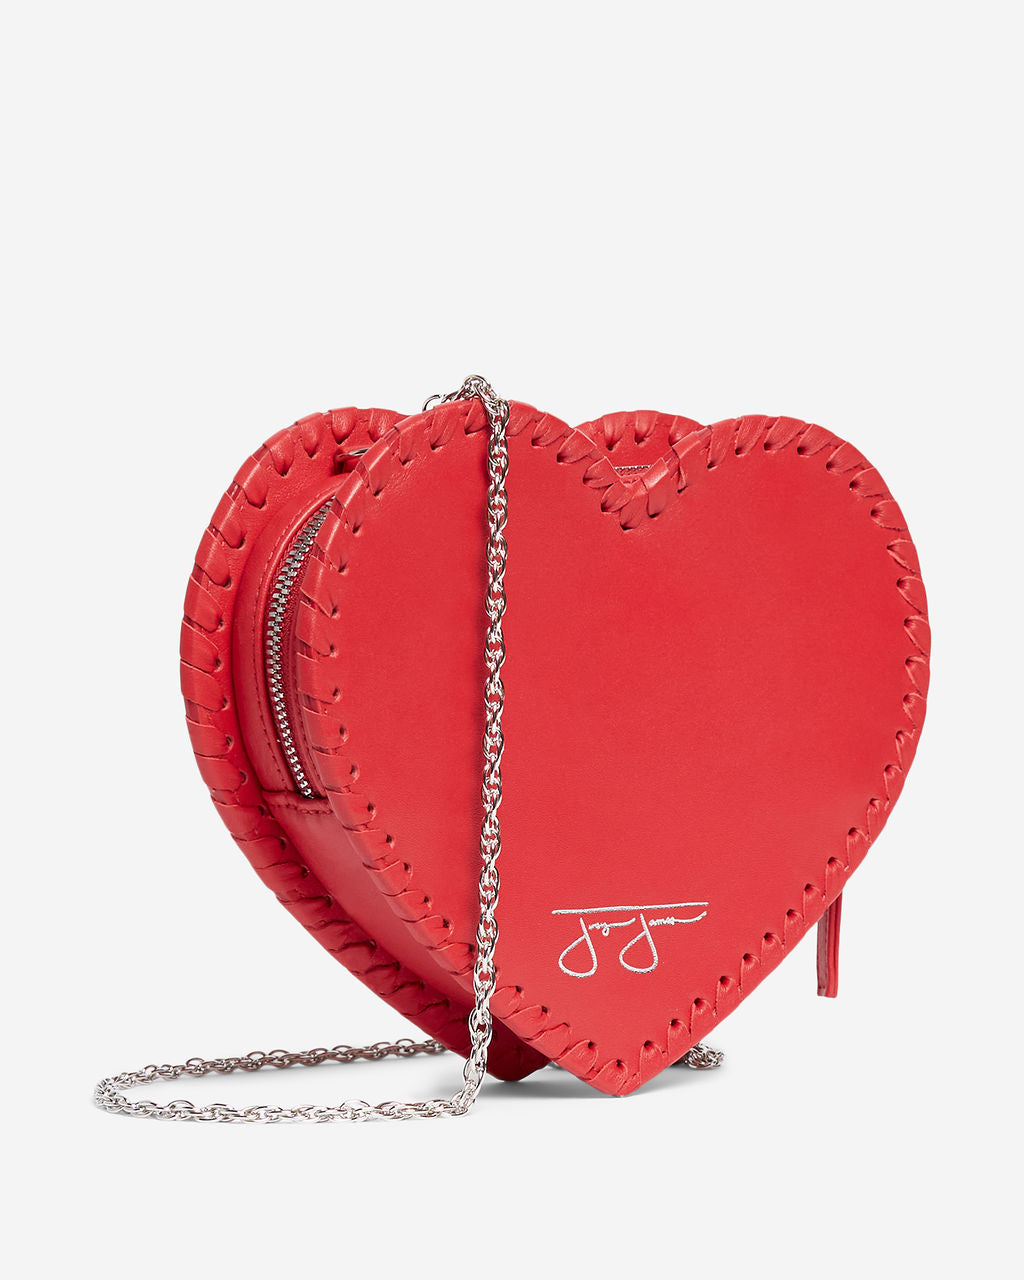 Closer to the Heart Clutch